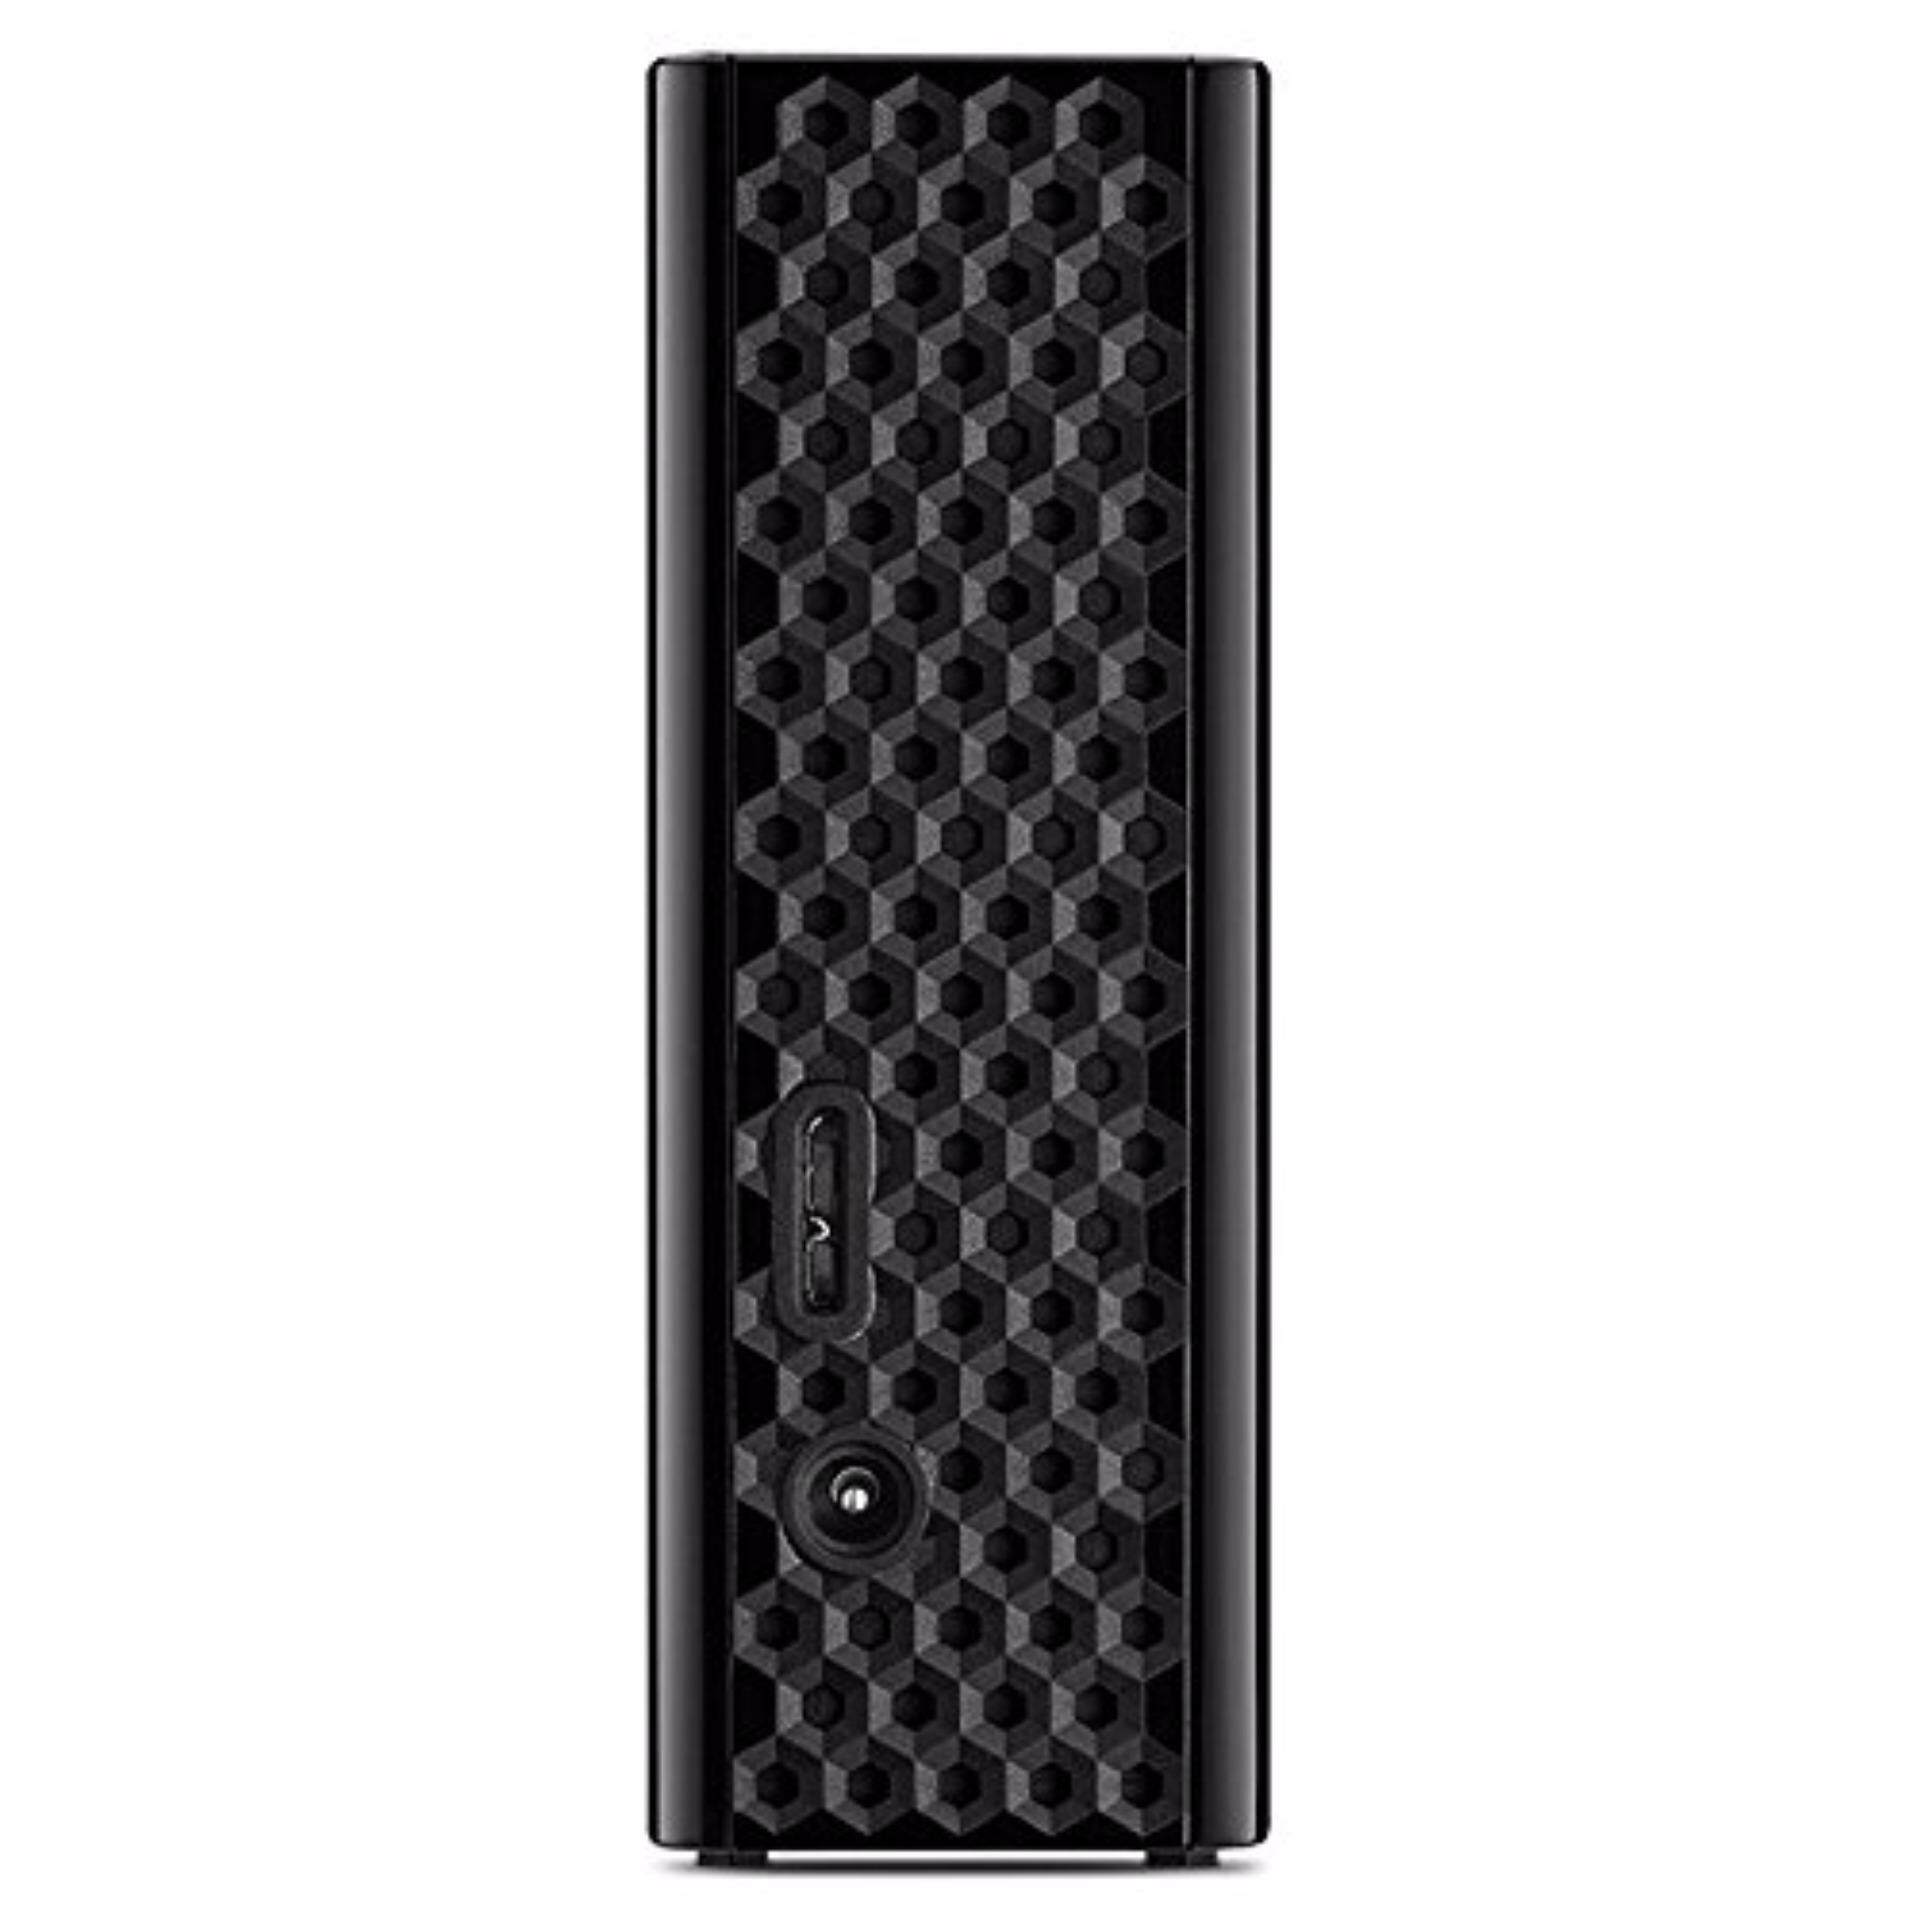 Seagate Backup Plus Desktop Hub 4TB (Up to 160 MB/s) with Integrated USB 3.0 Back up & Charge Hub Downloadable Seagate Backup Software Mac & Windows Compatible external hard disk